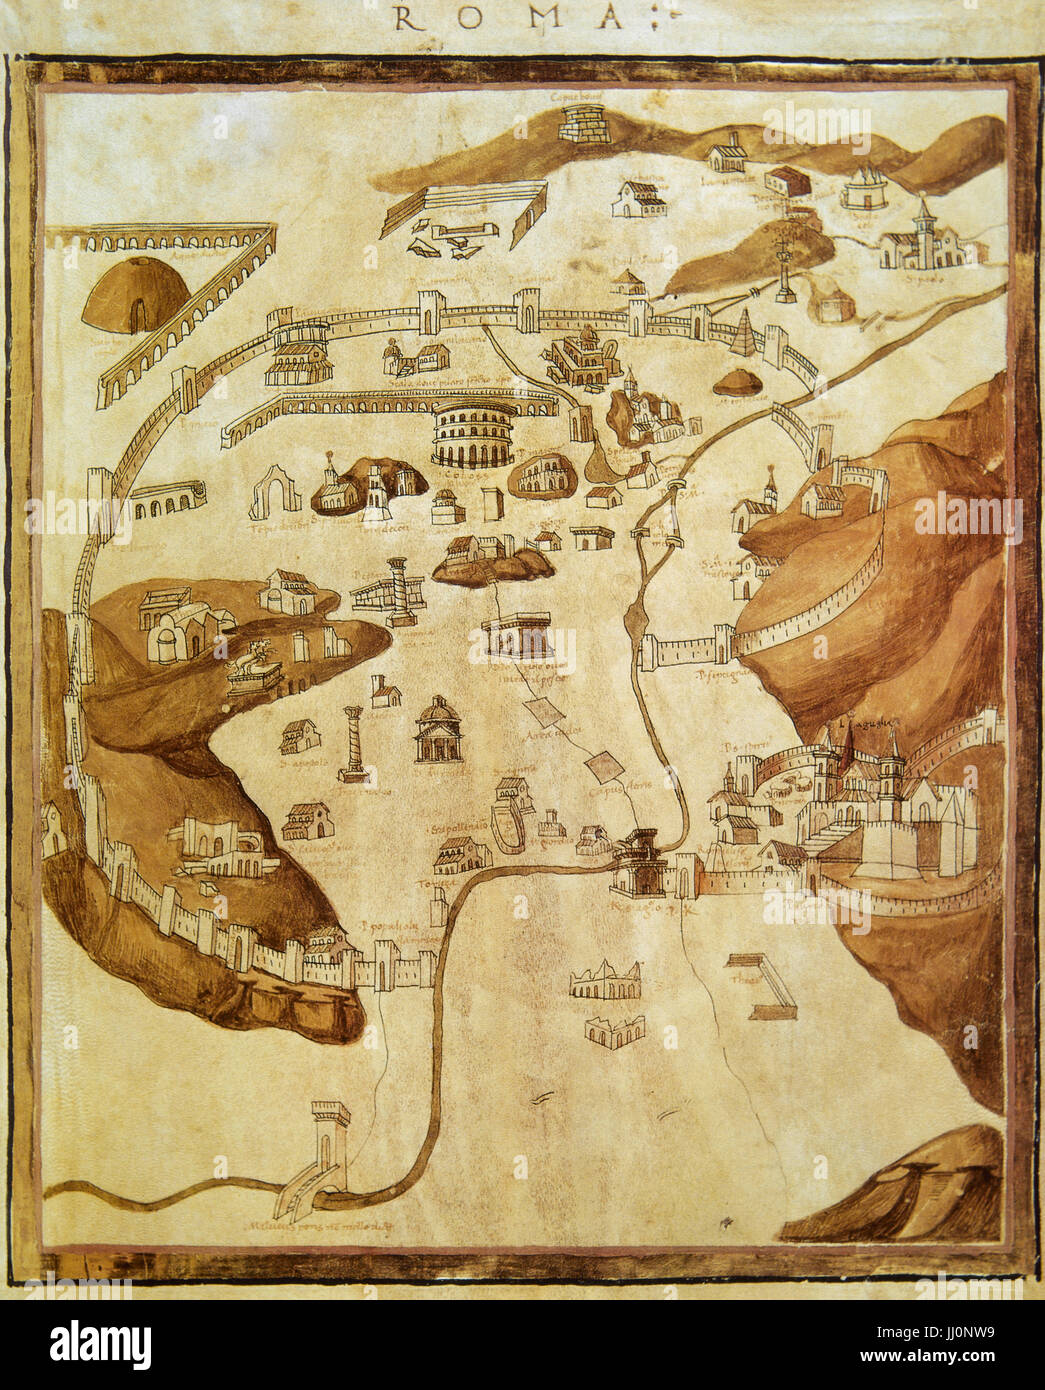 Ptolemy (100-170 AD). Greco-Egyptian astronomer, geographer and astrologer. Rome. Map, 1460. Vatican Library. Italy. Stock Photo